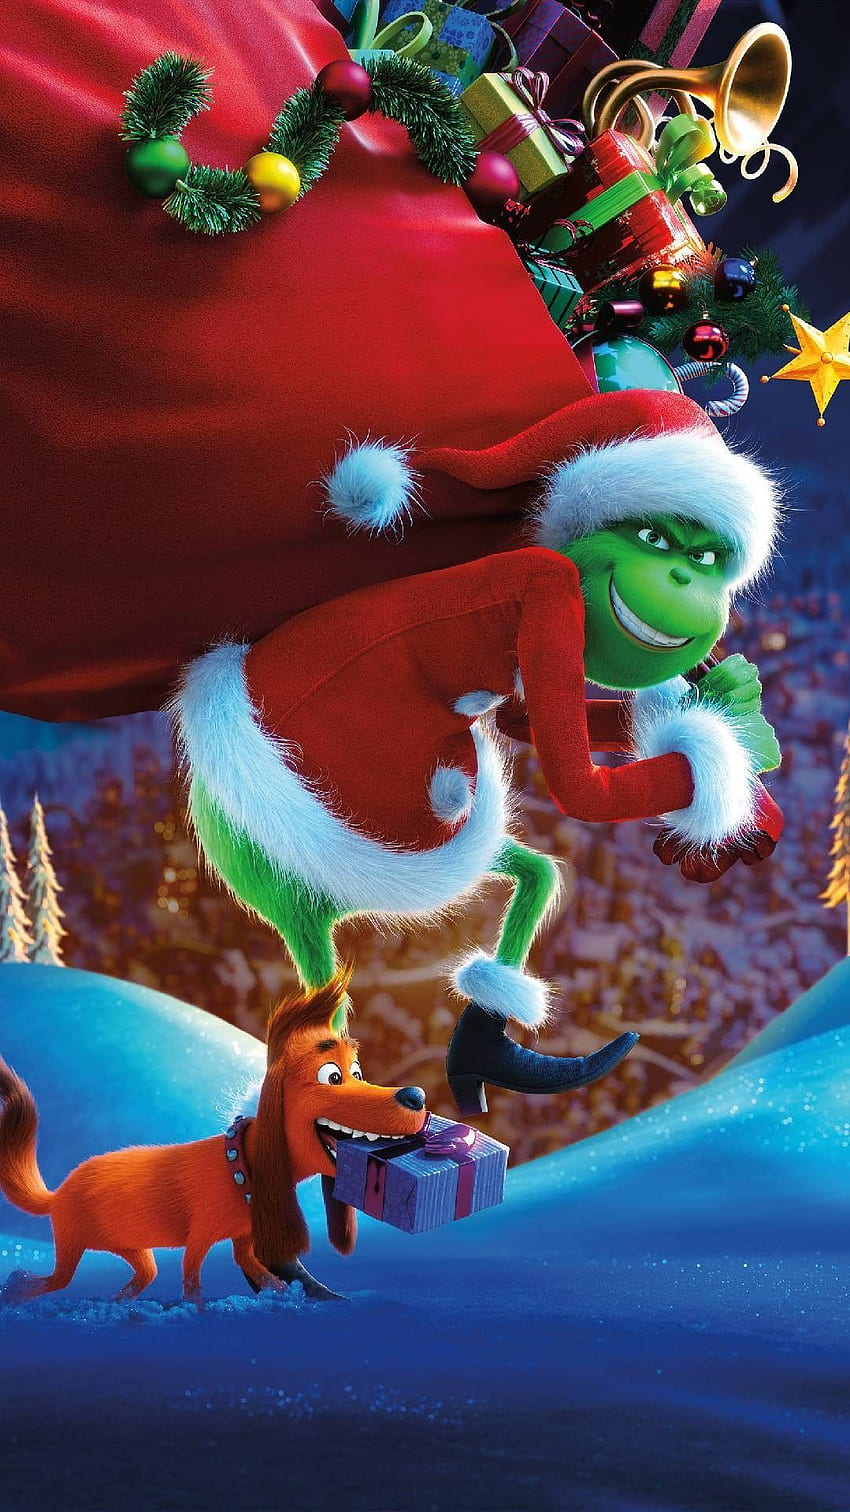 Wallpaper ID 321012  Movie The Grinch Phone Wallpaper Christmas  1440x2960 free download